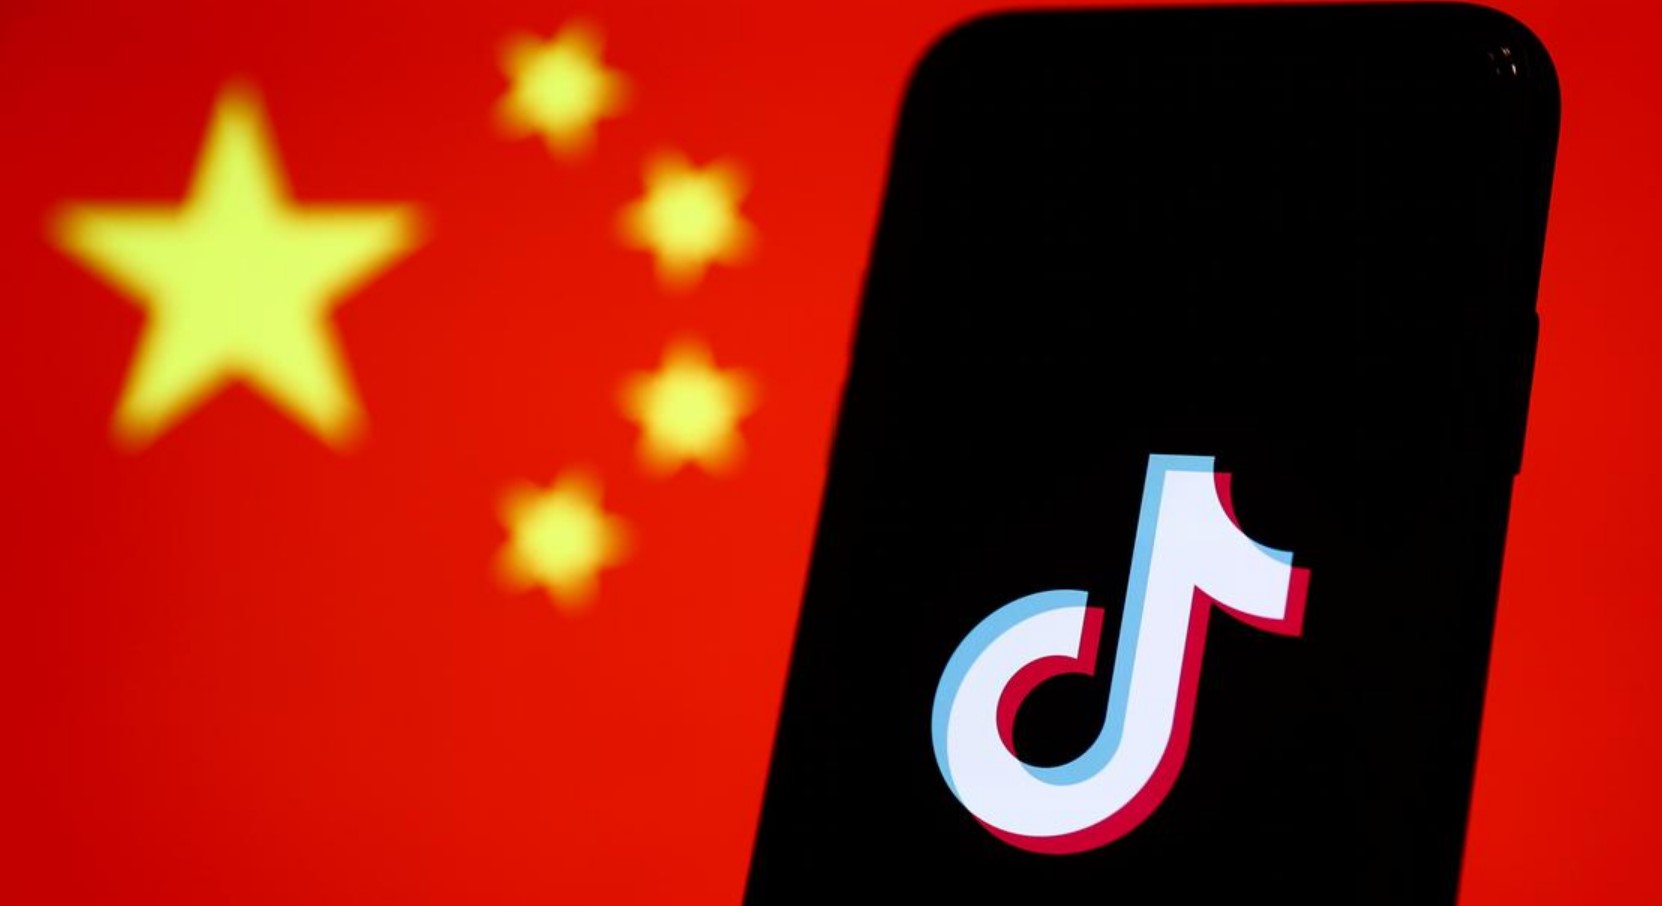 Why TikTok Pixel Spyware is deceitful and just plain wrong